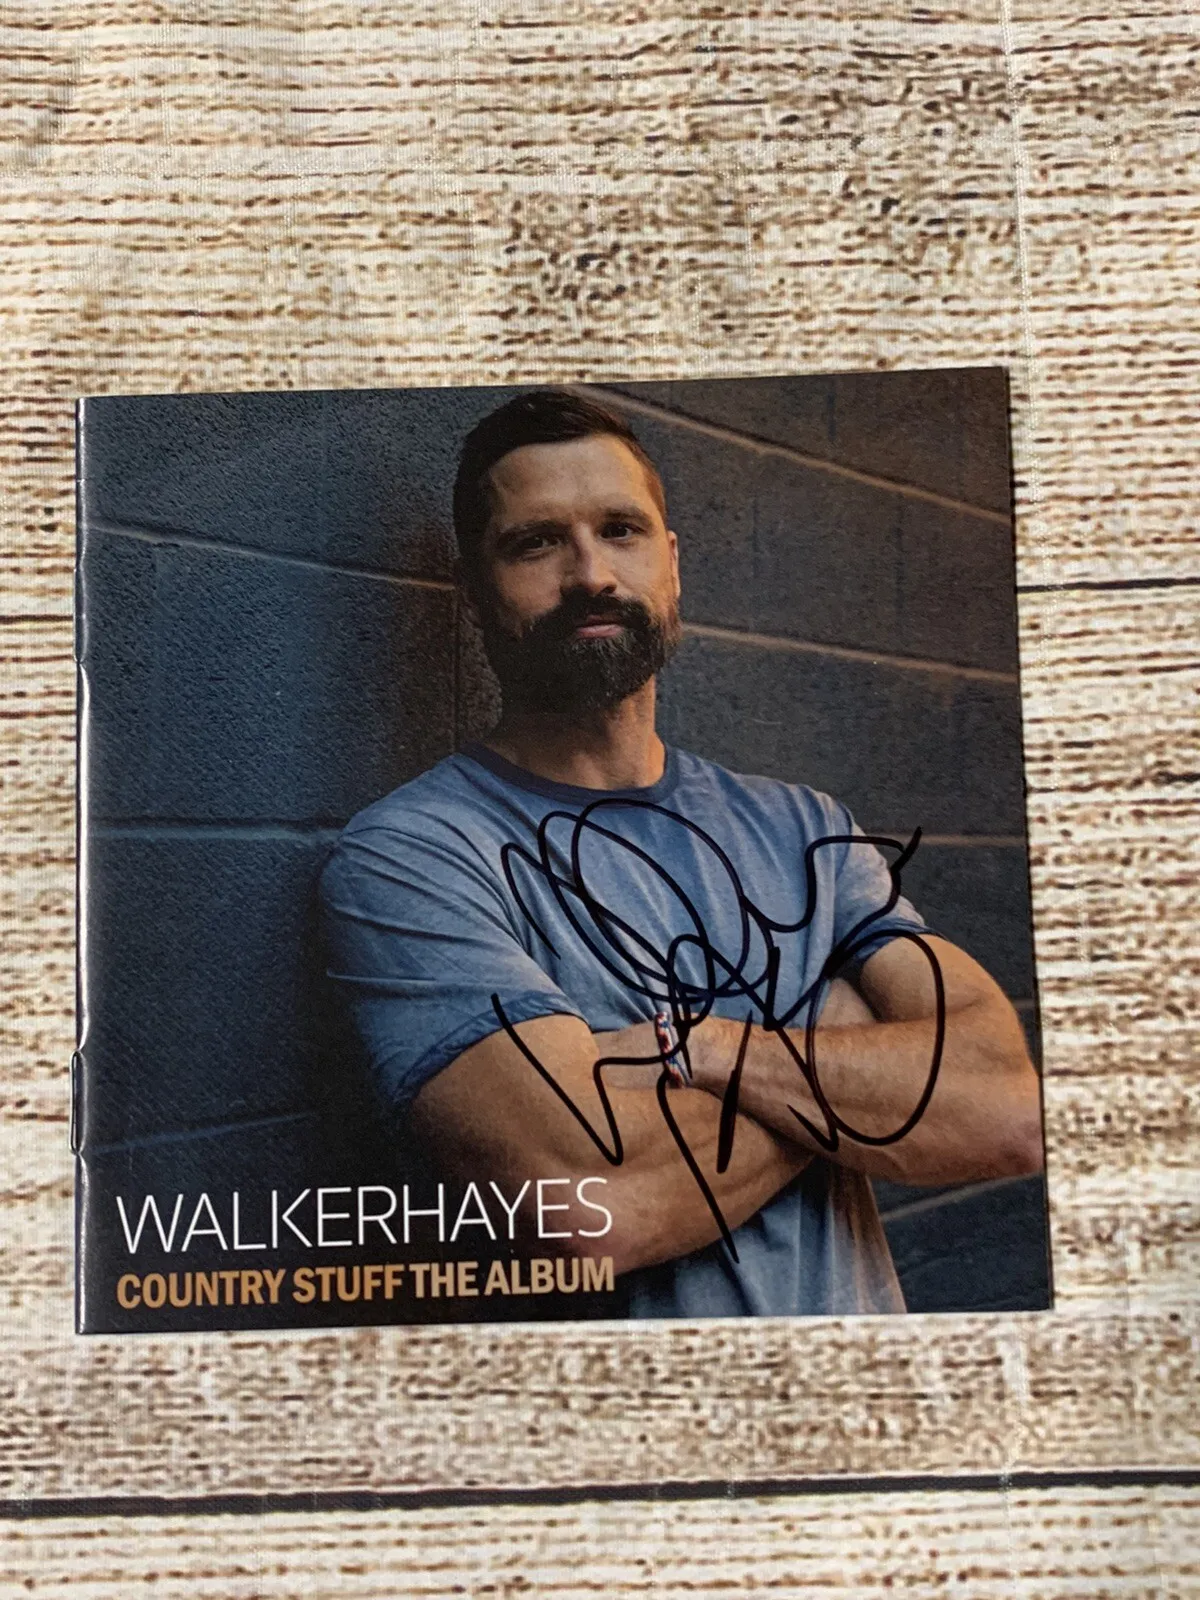 WALKER HAYES Signed CD Booklet Cover Country Stuff the Album Autographed